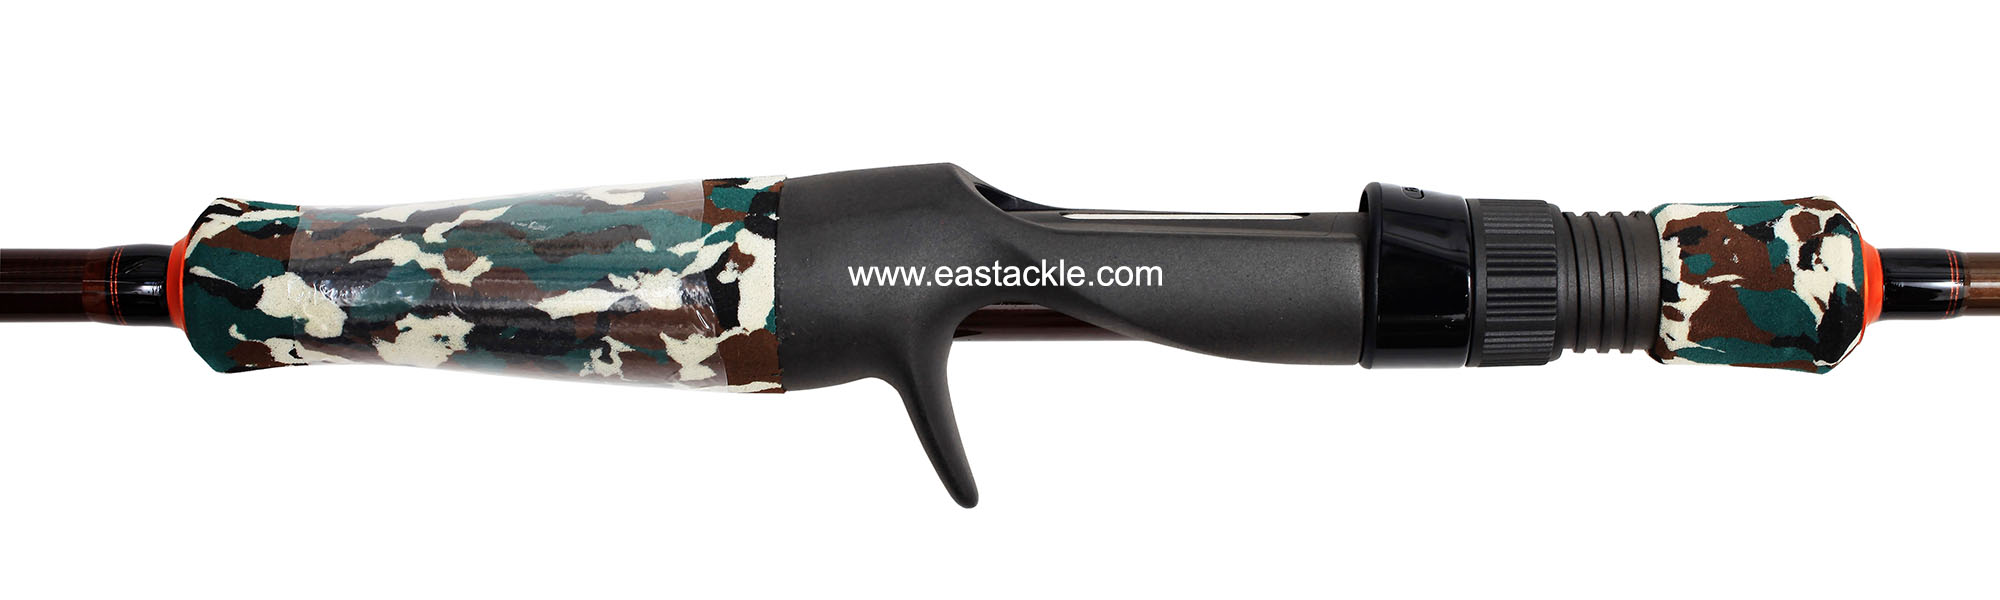 Storm - Discovery - DVC602UL - Bait Casting Rod - Reel Seat  (Side View) | Eastackle